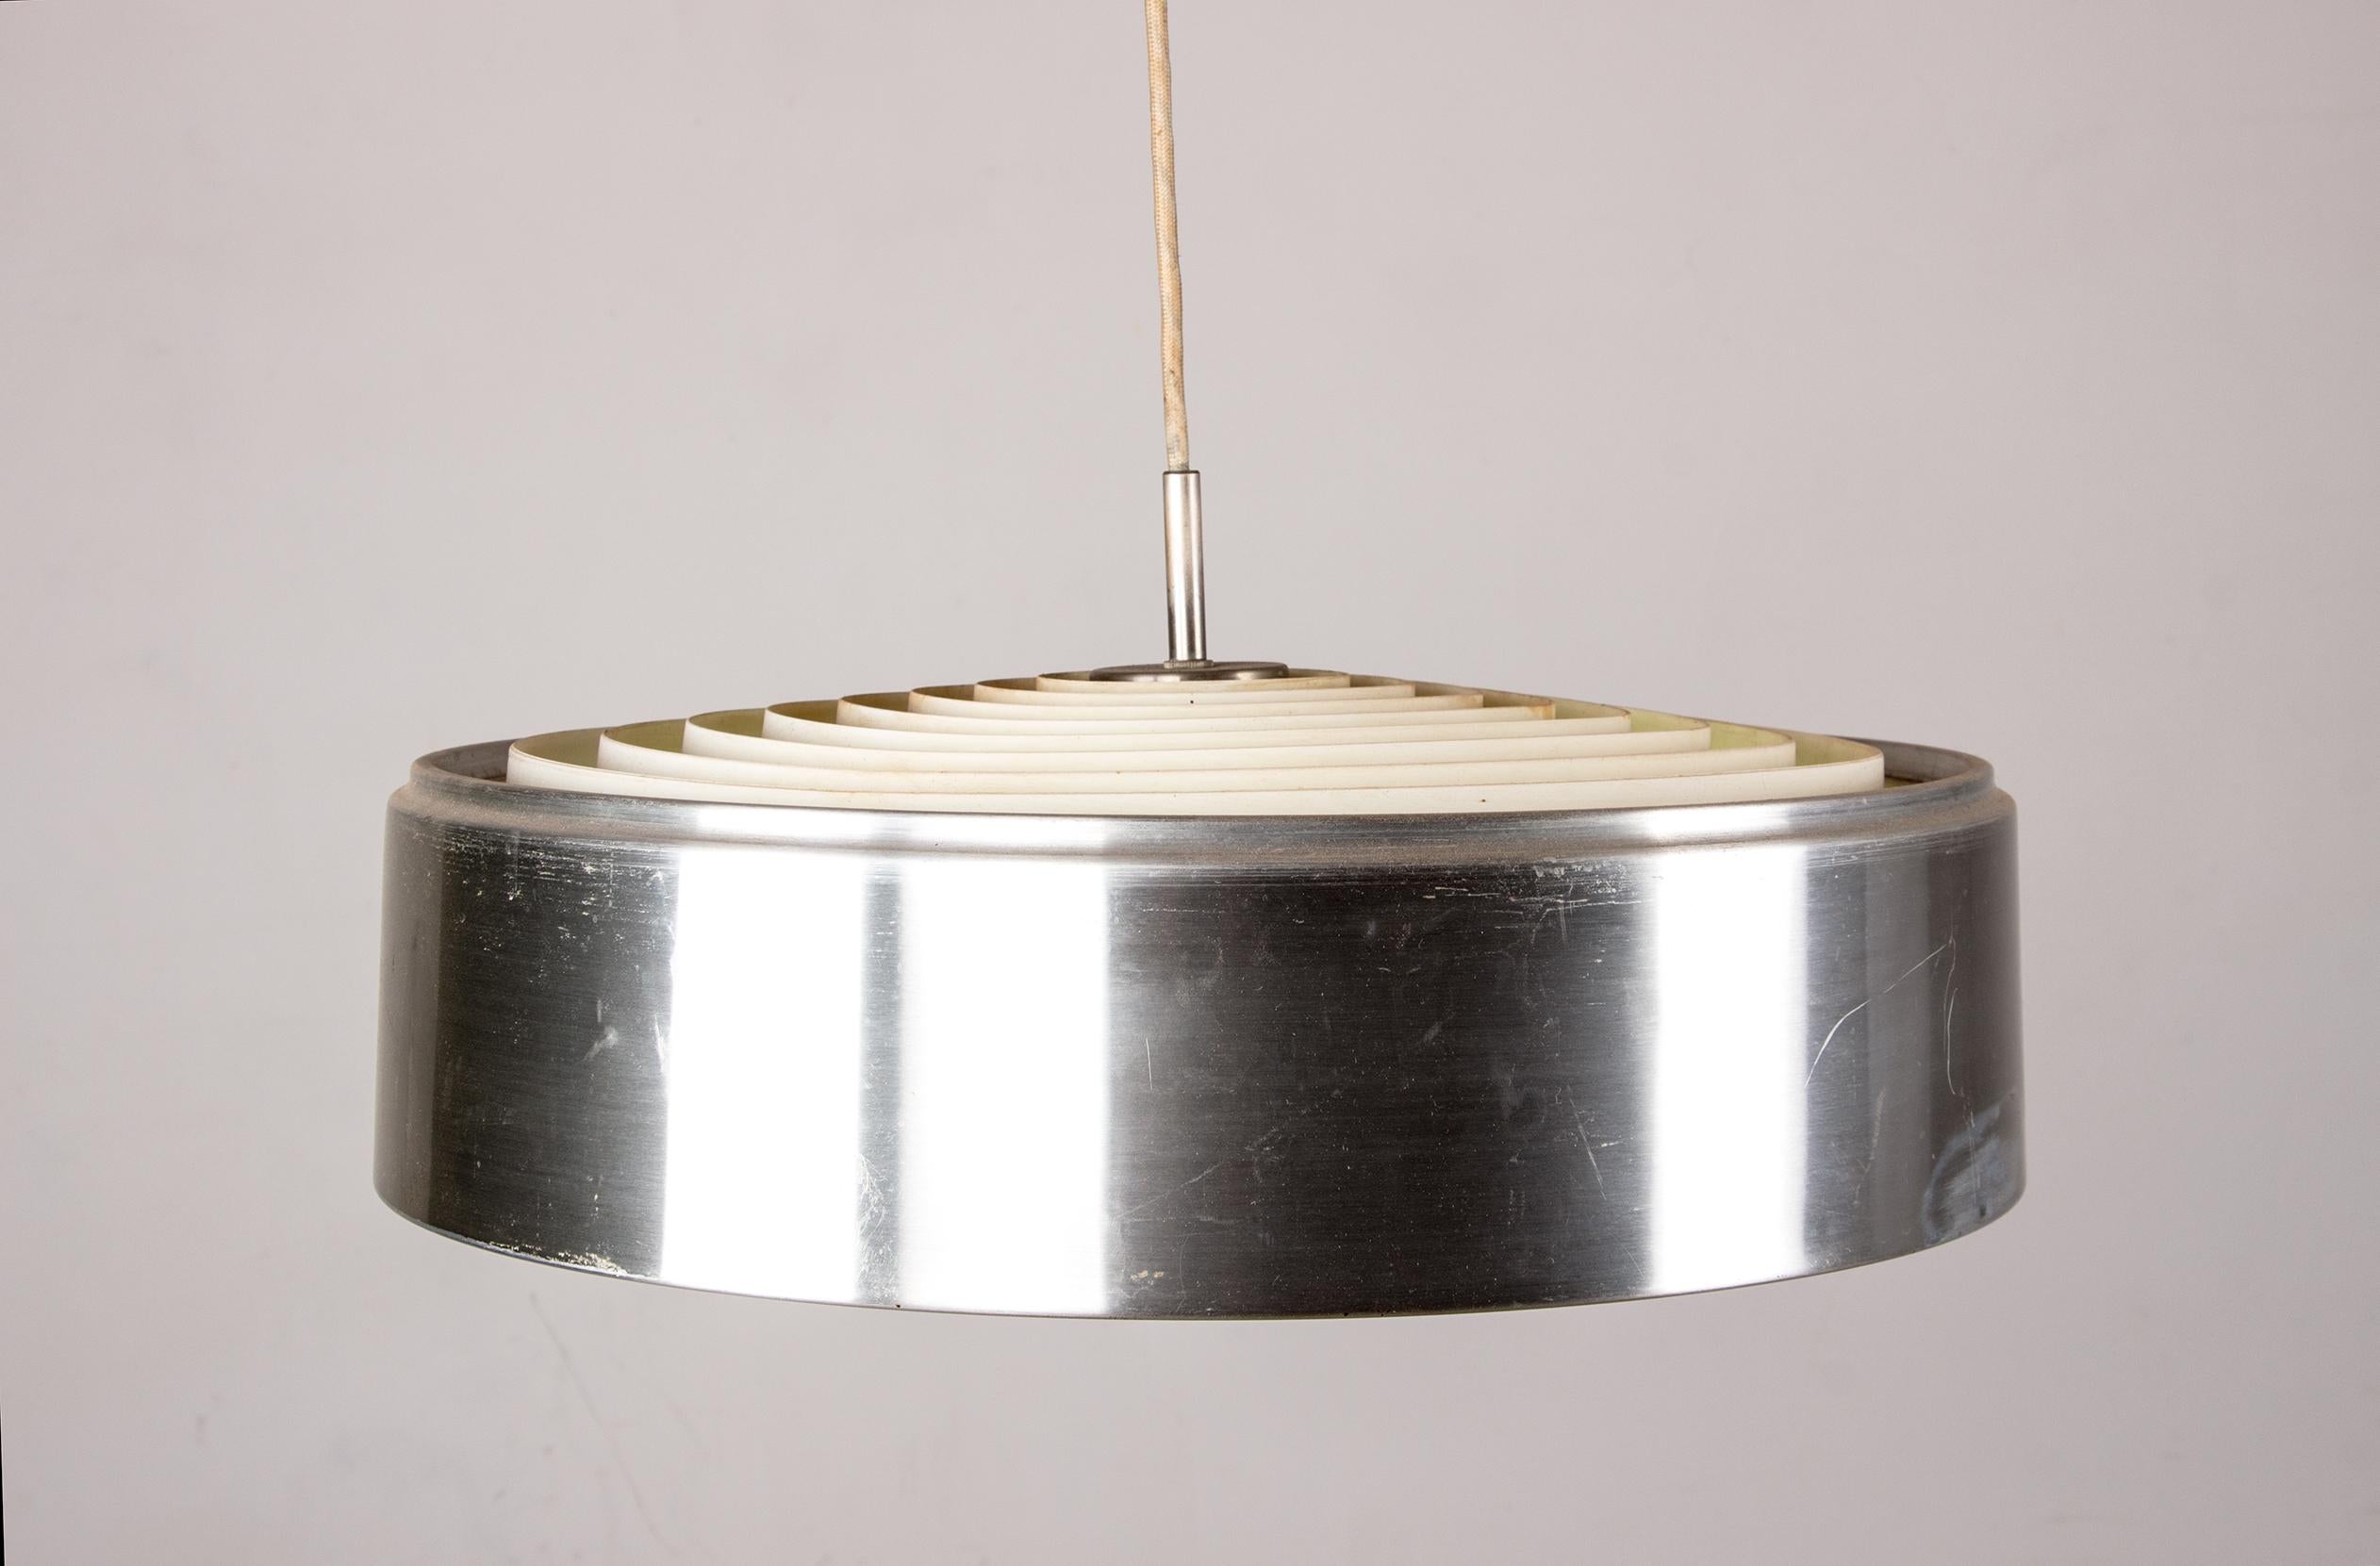 Scandinavian Modern Large Suspension in Aluminum, brass and plastic by Louis Poulsen 1960. For Sale